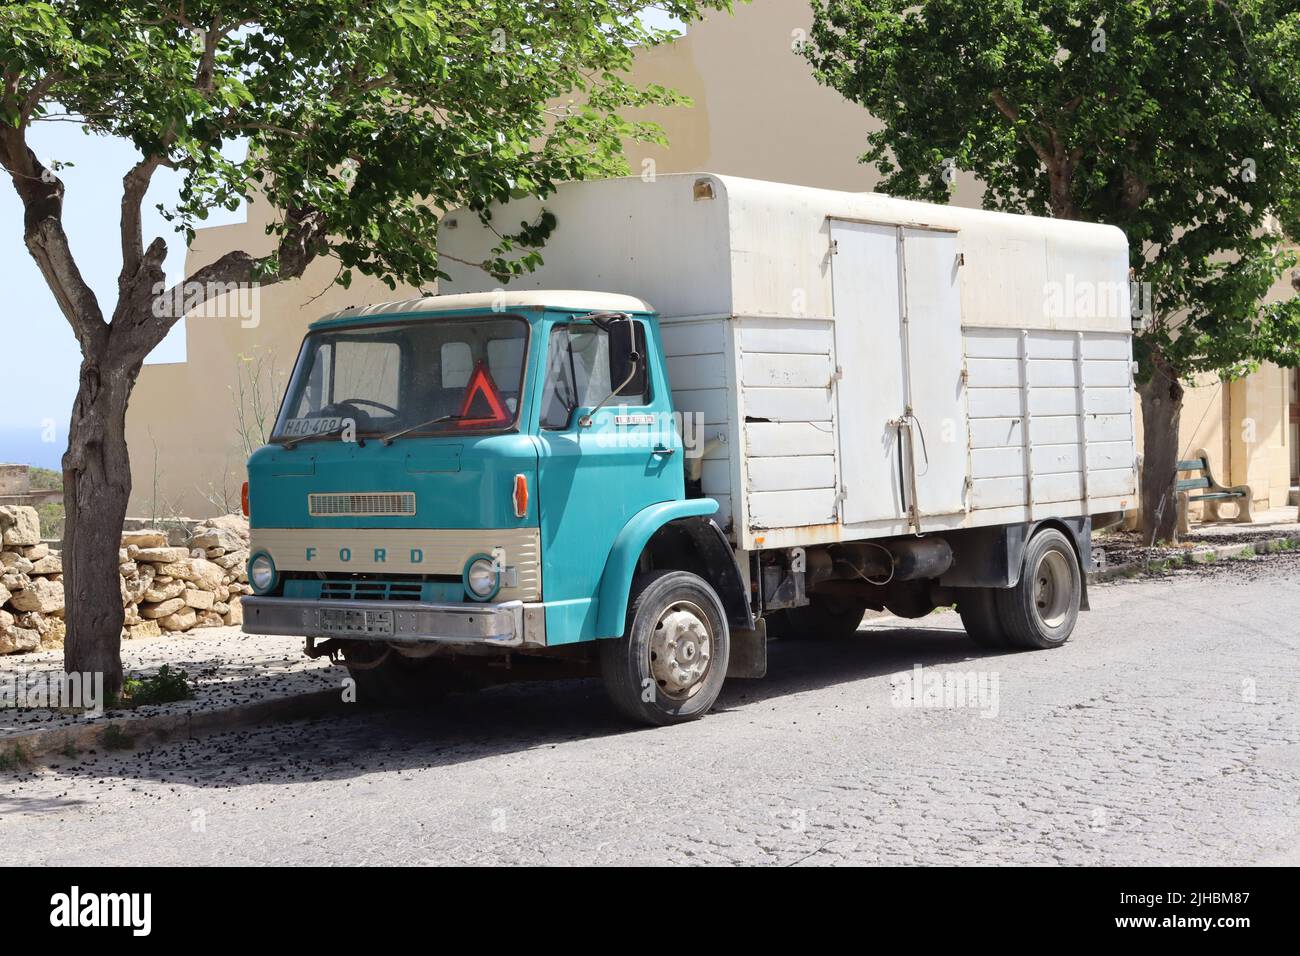 A vintage Ford D series truck manufactured from 1965 - 1982 still in use today. Nadur, Gozo, Malta Stock Photo